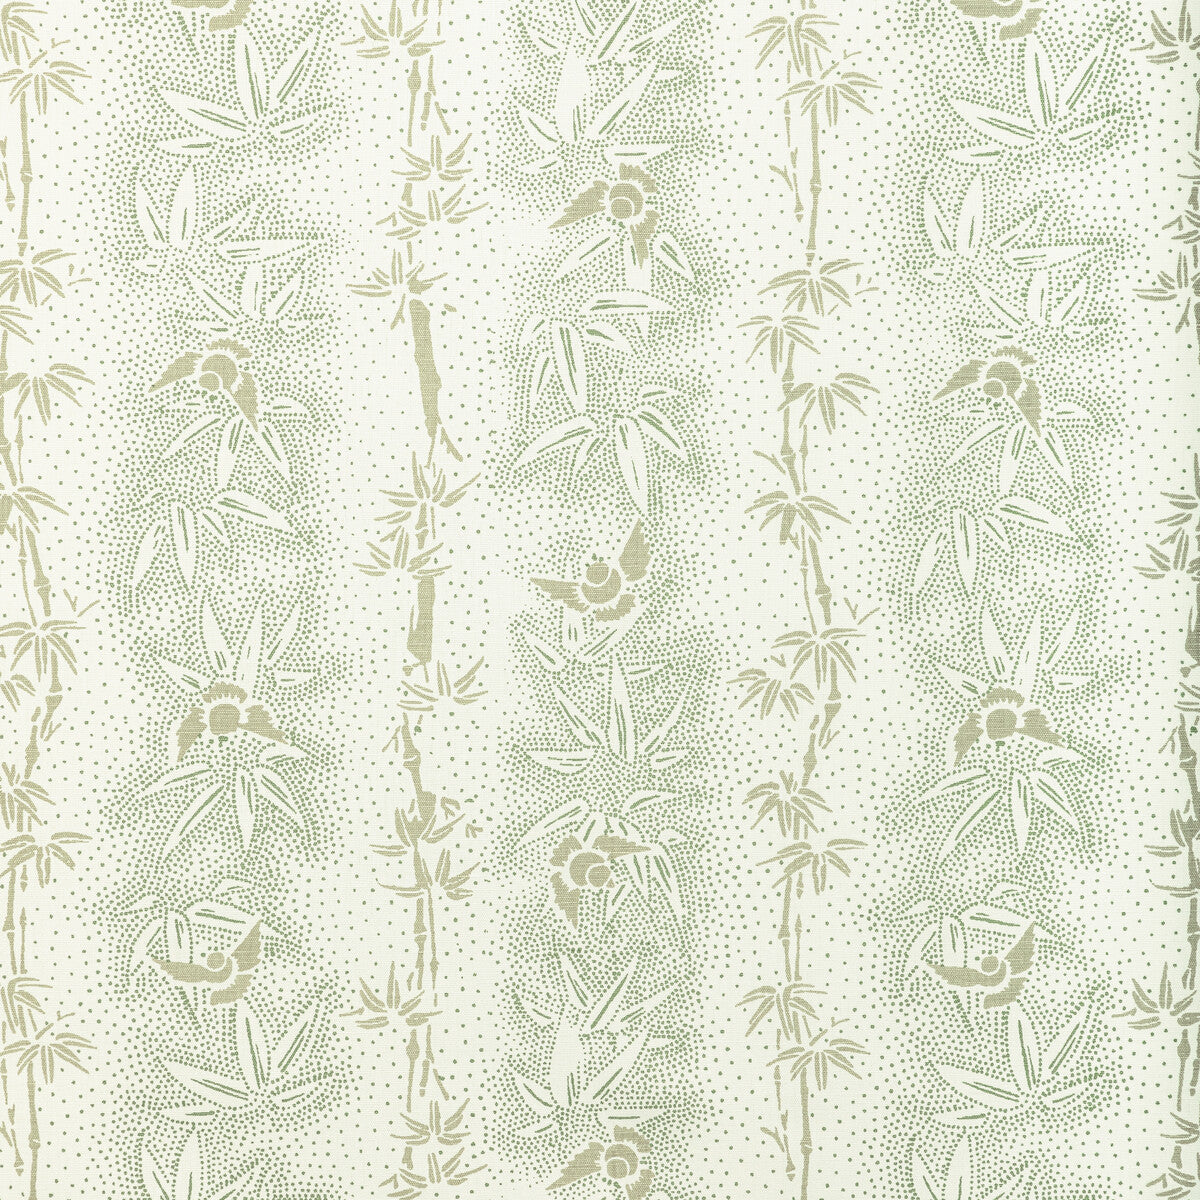 Passerine fabric in leek color - pattern PASSERINE.330.0 - by Kravet Couture in the Jan Showers Charmant collection